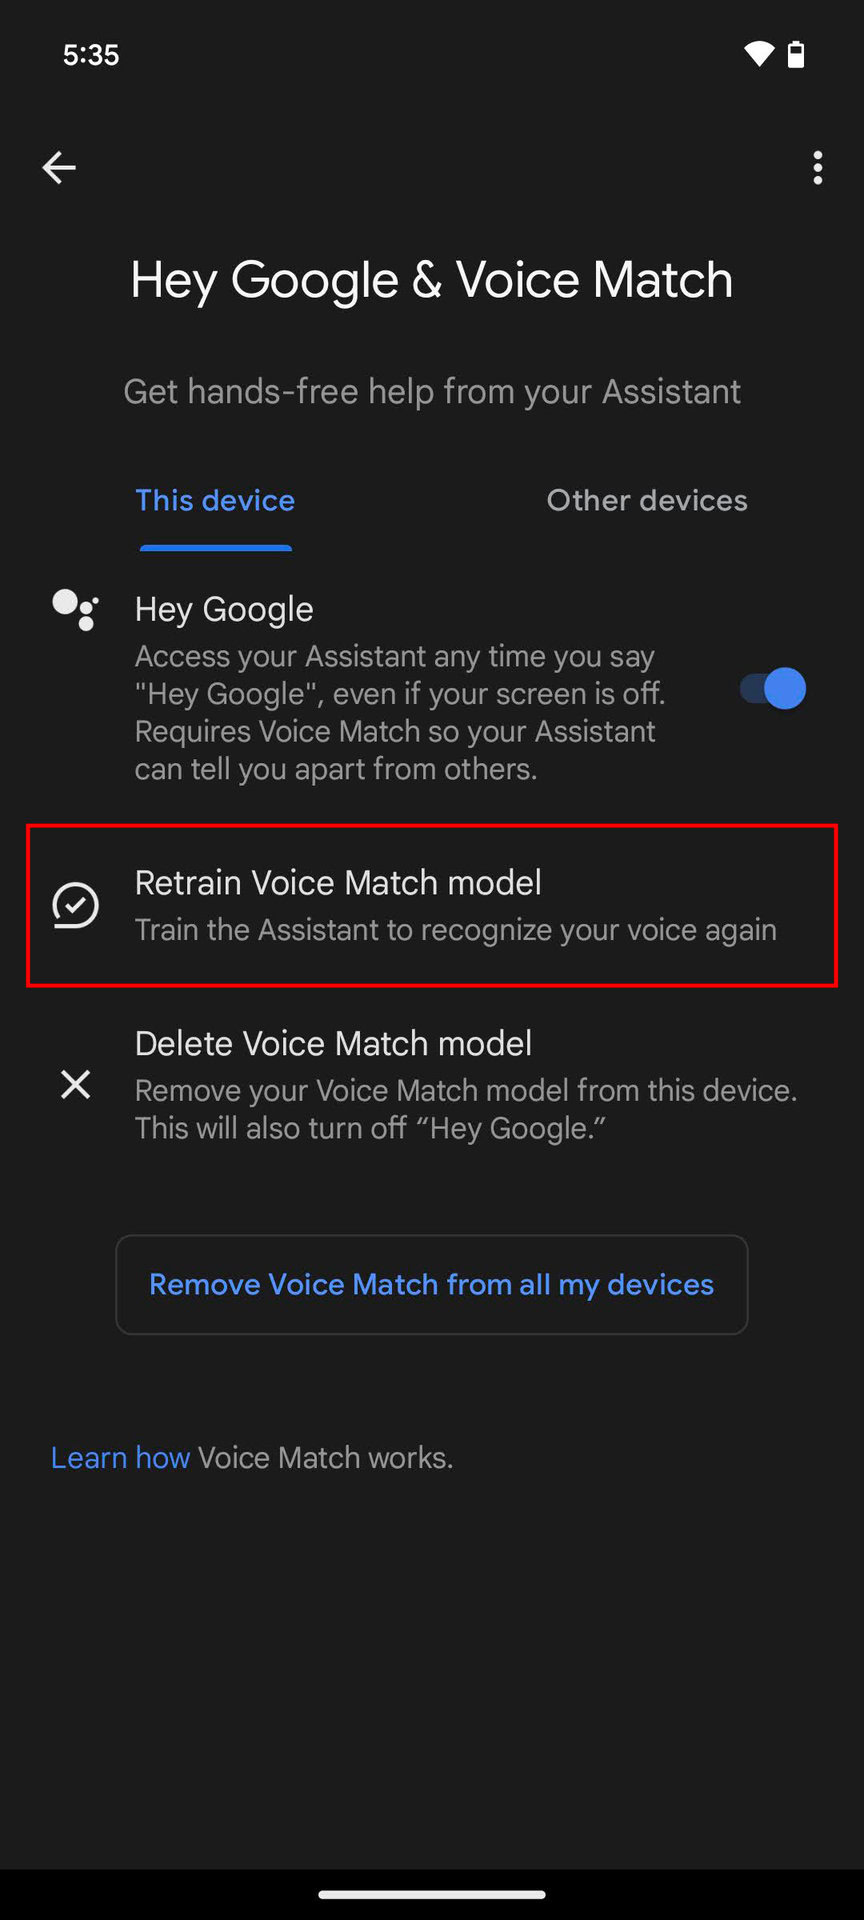 How to retrain Voice Match model for Google Assistant (6)